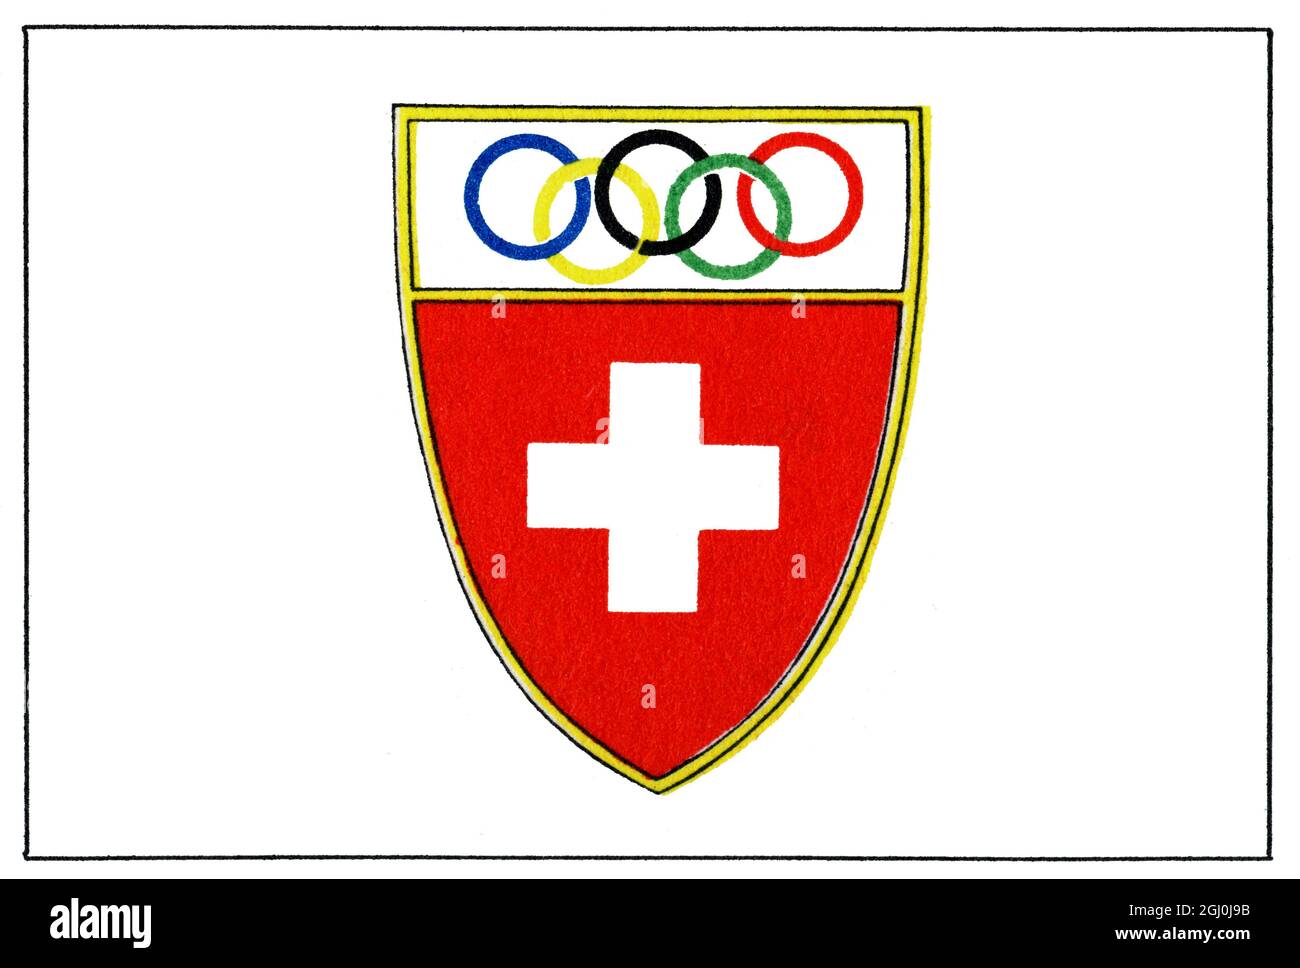 Swiss Olympic Committee - Cour-Lausanne - seit 1896 dabei ©TopFoto Stockfoto